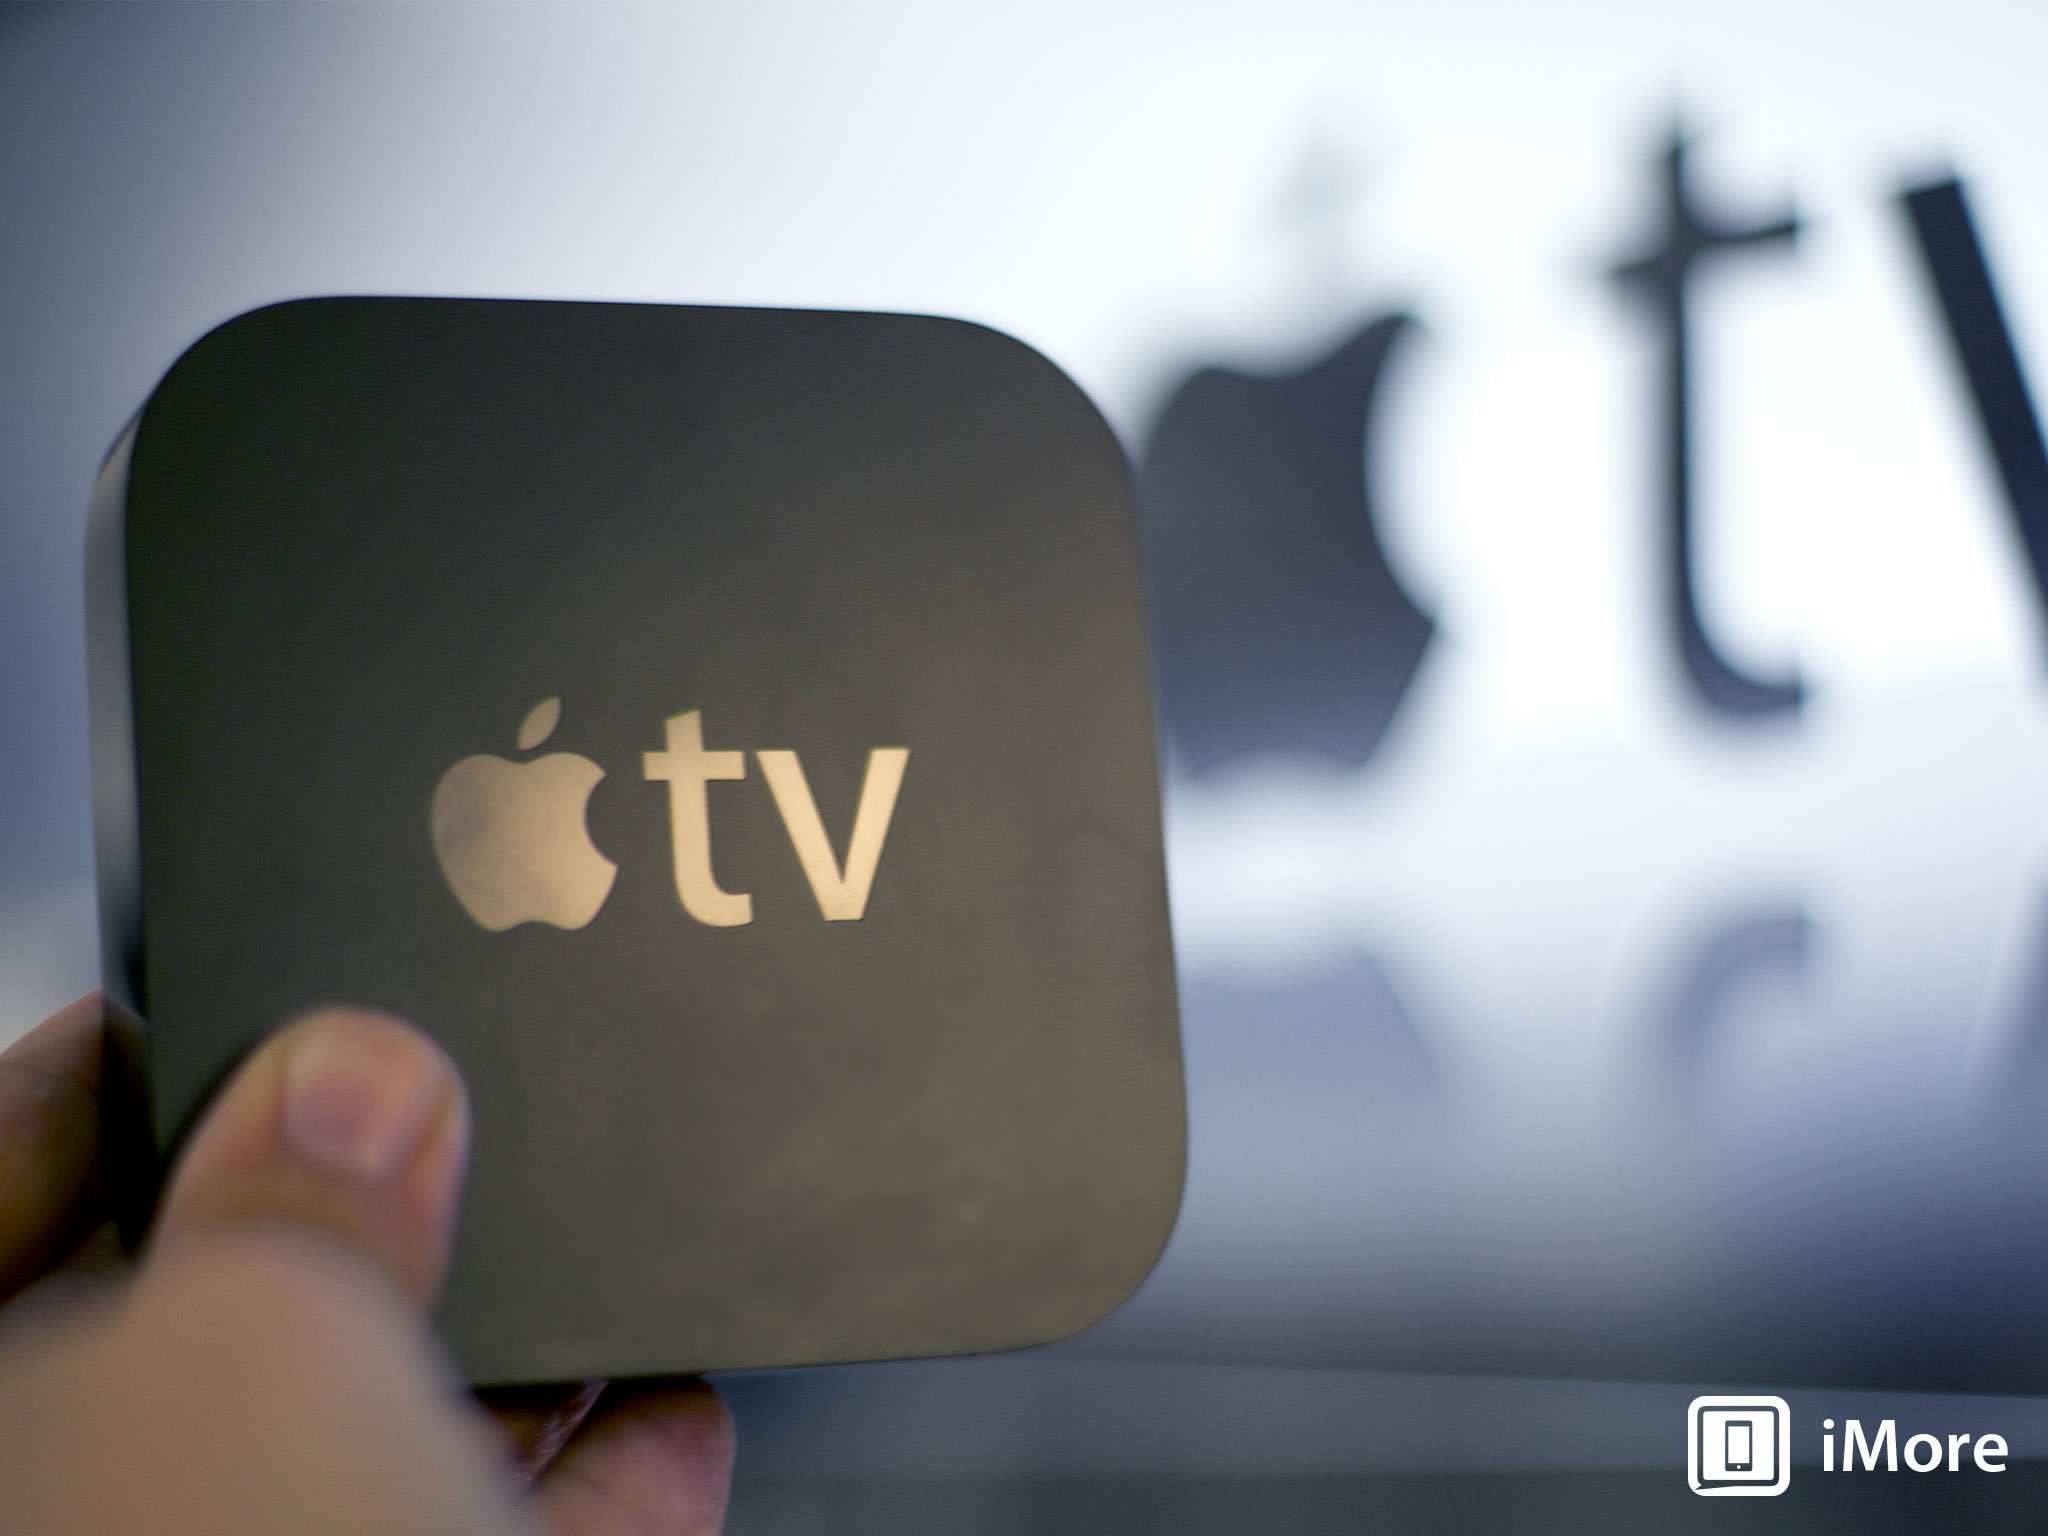 Apple TV sales last year topped billion, Cook says it's 'Difficult to call it a hobby'